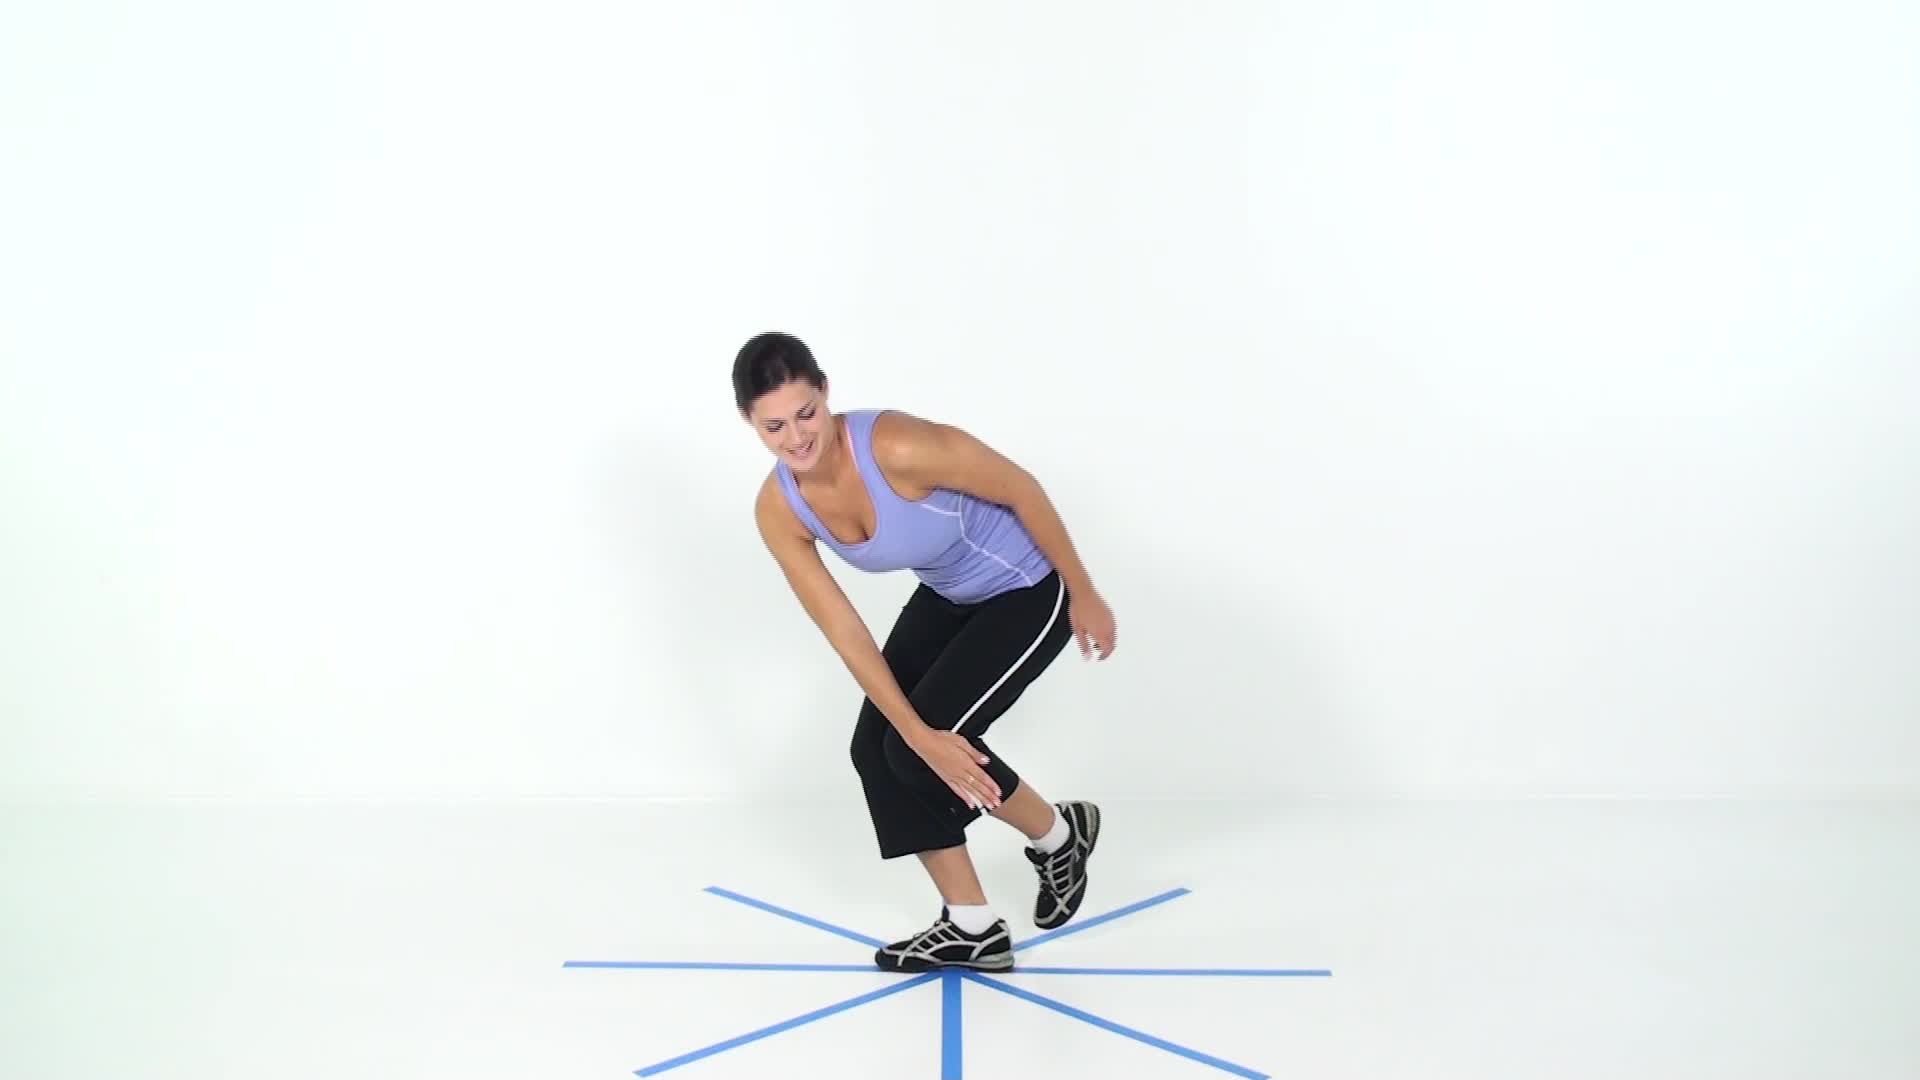 functional exercise